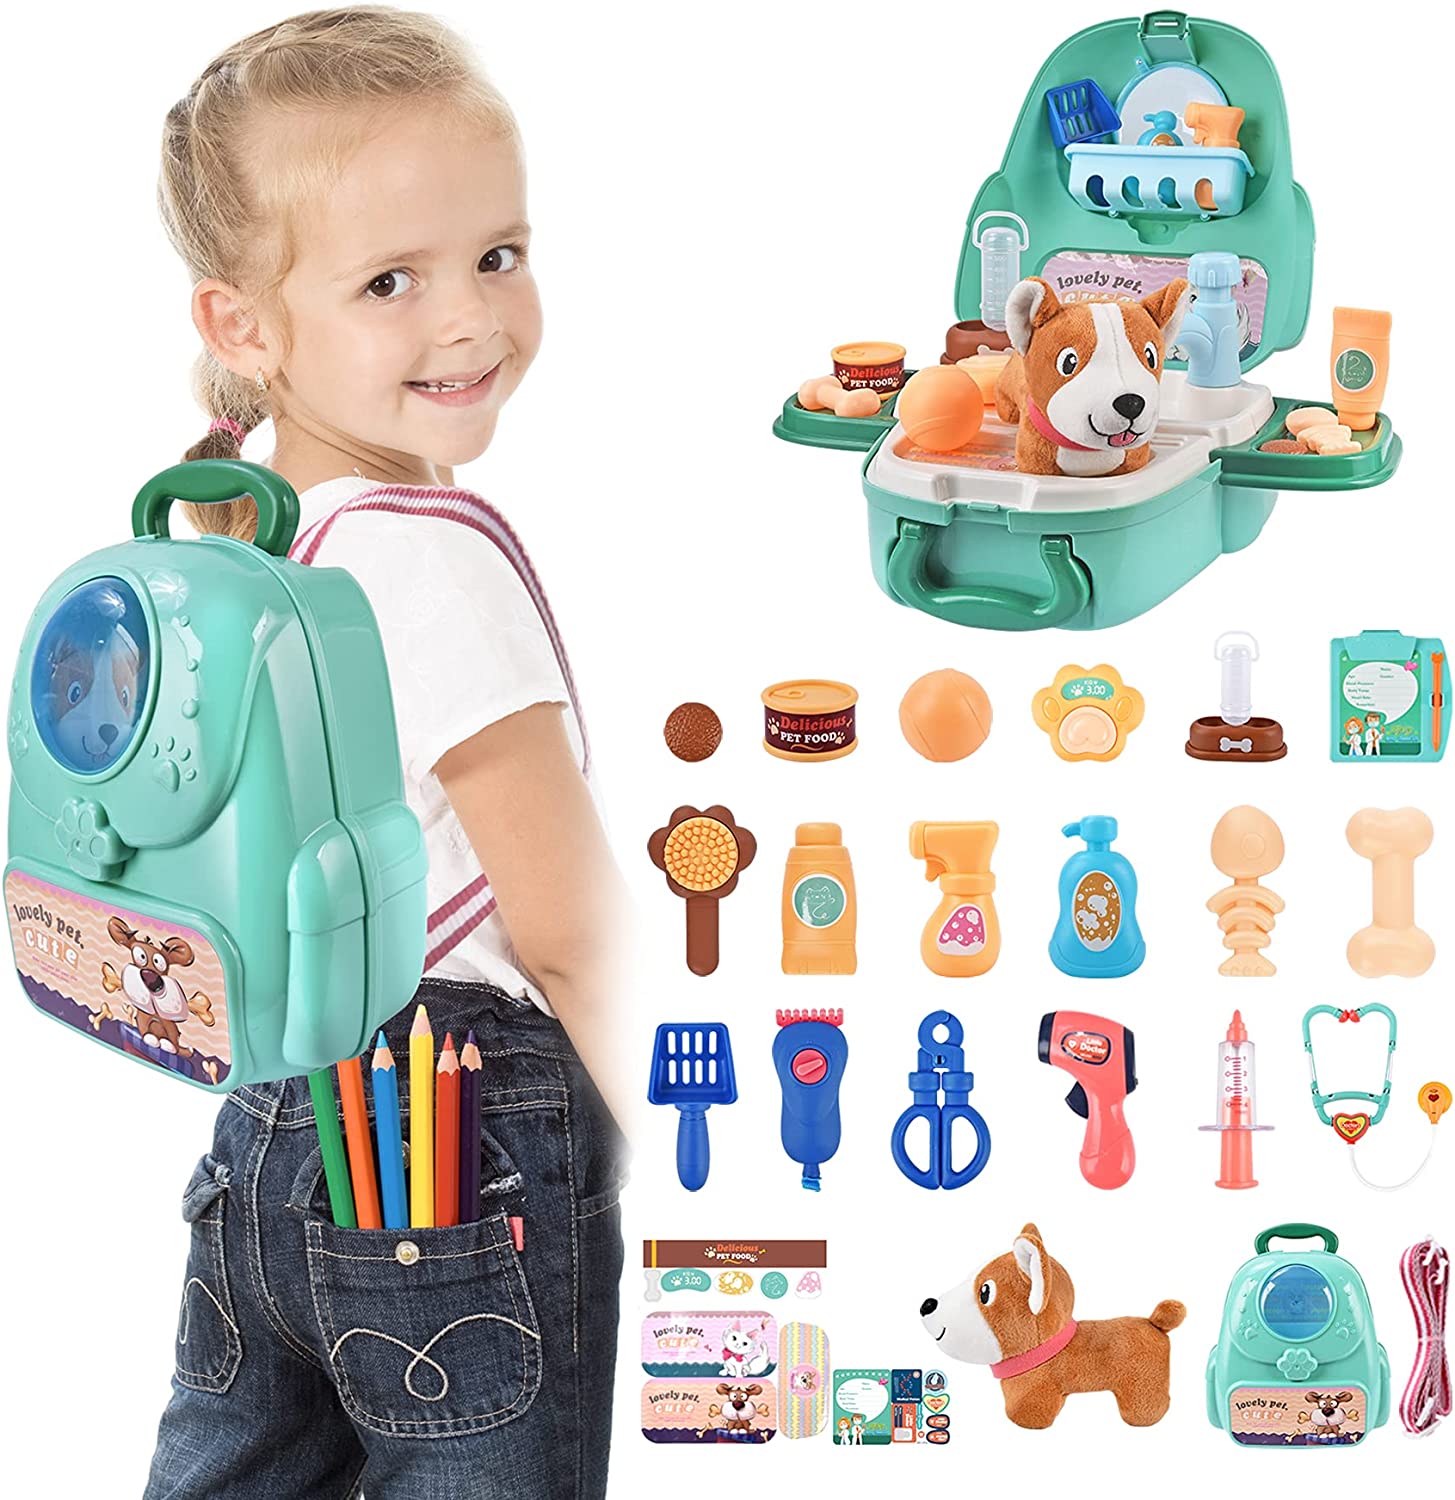 Joyooss Kids Pet Dog Carrier Backpack Doctor Toy, 20PCS Pet Kit Vet Role Pretend Play Set Equipment, Pet Care Feeding Grooming Medical Toy for Toddlers Boys Girls Ages 3-7